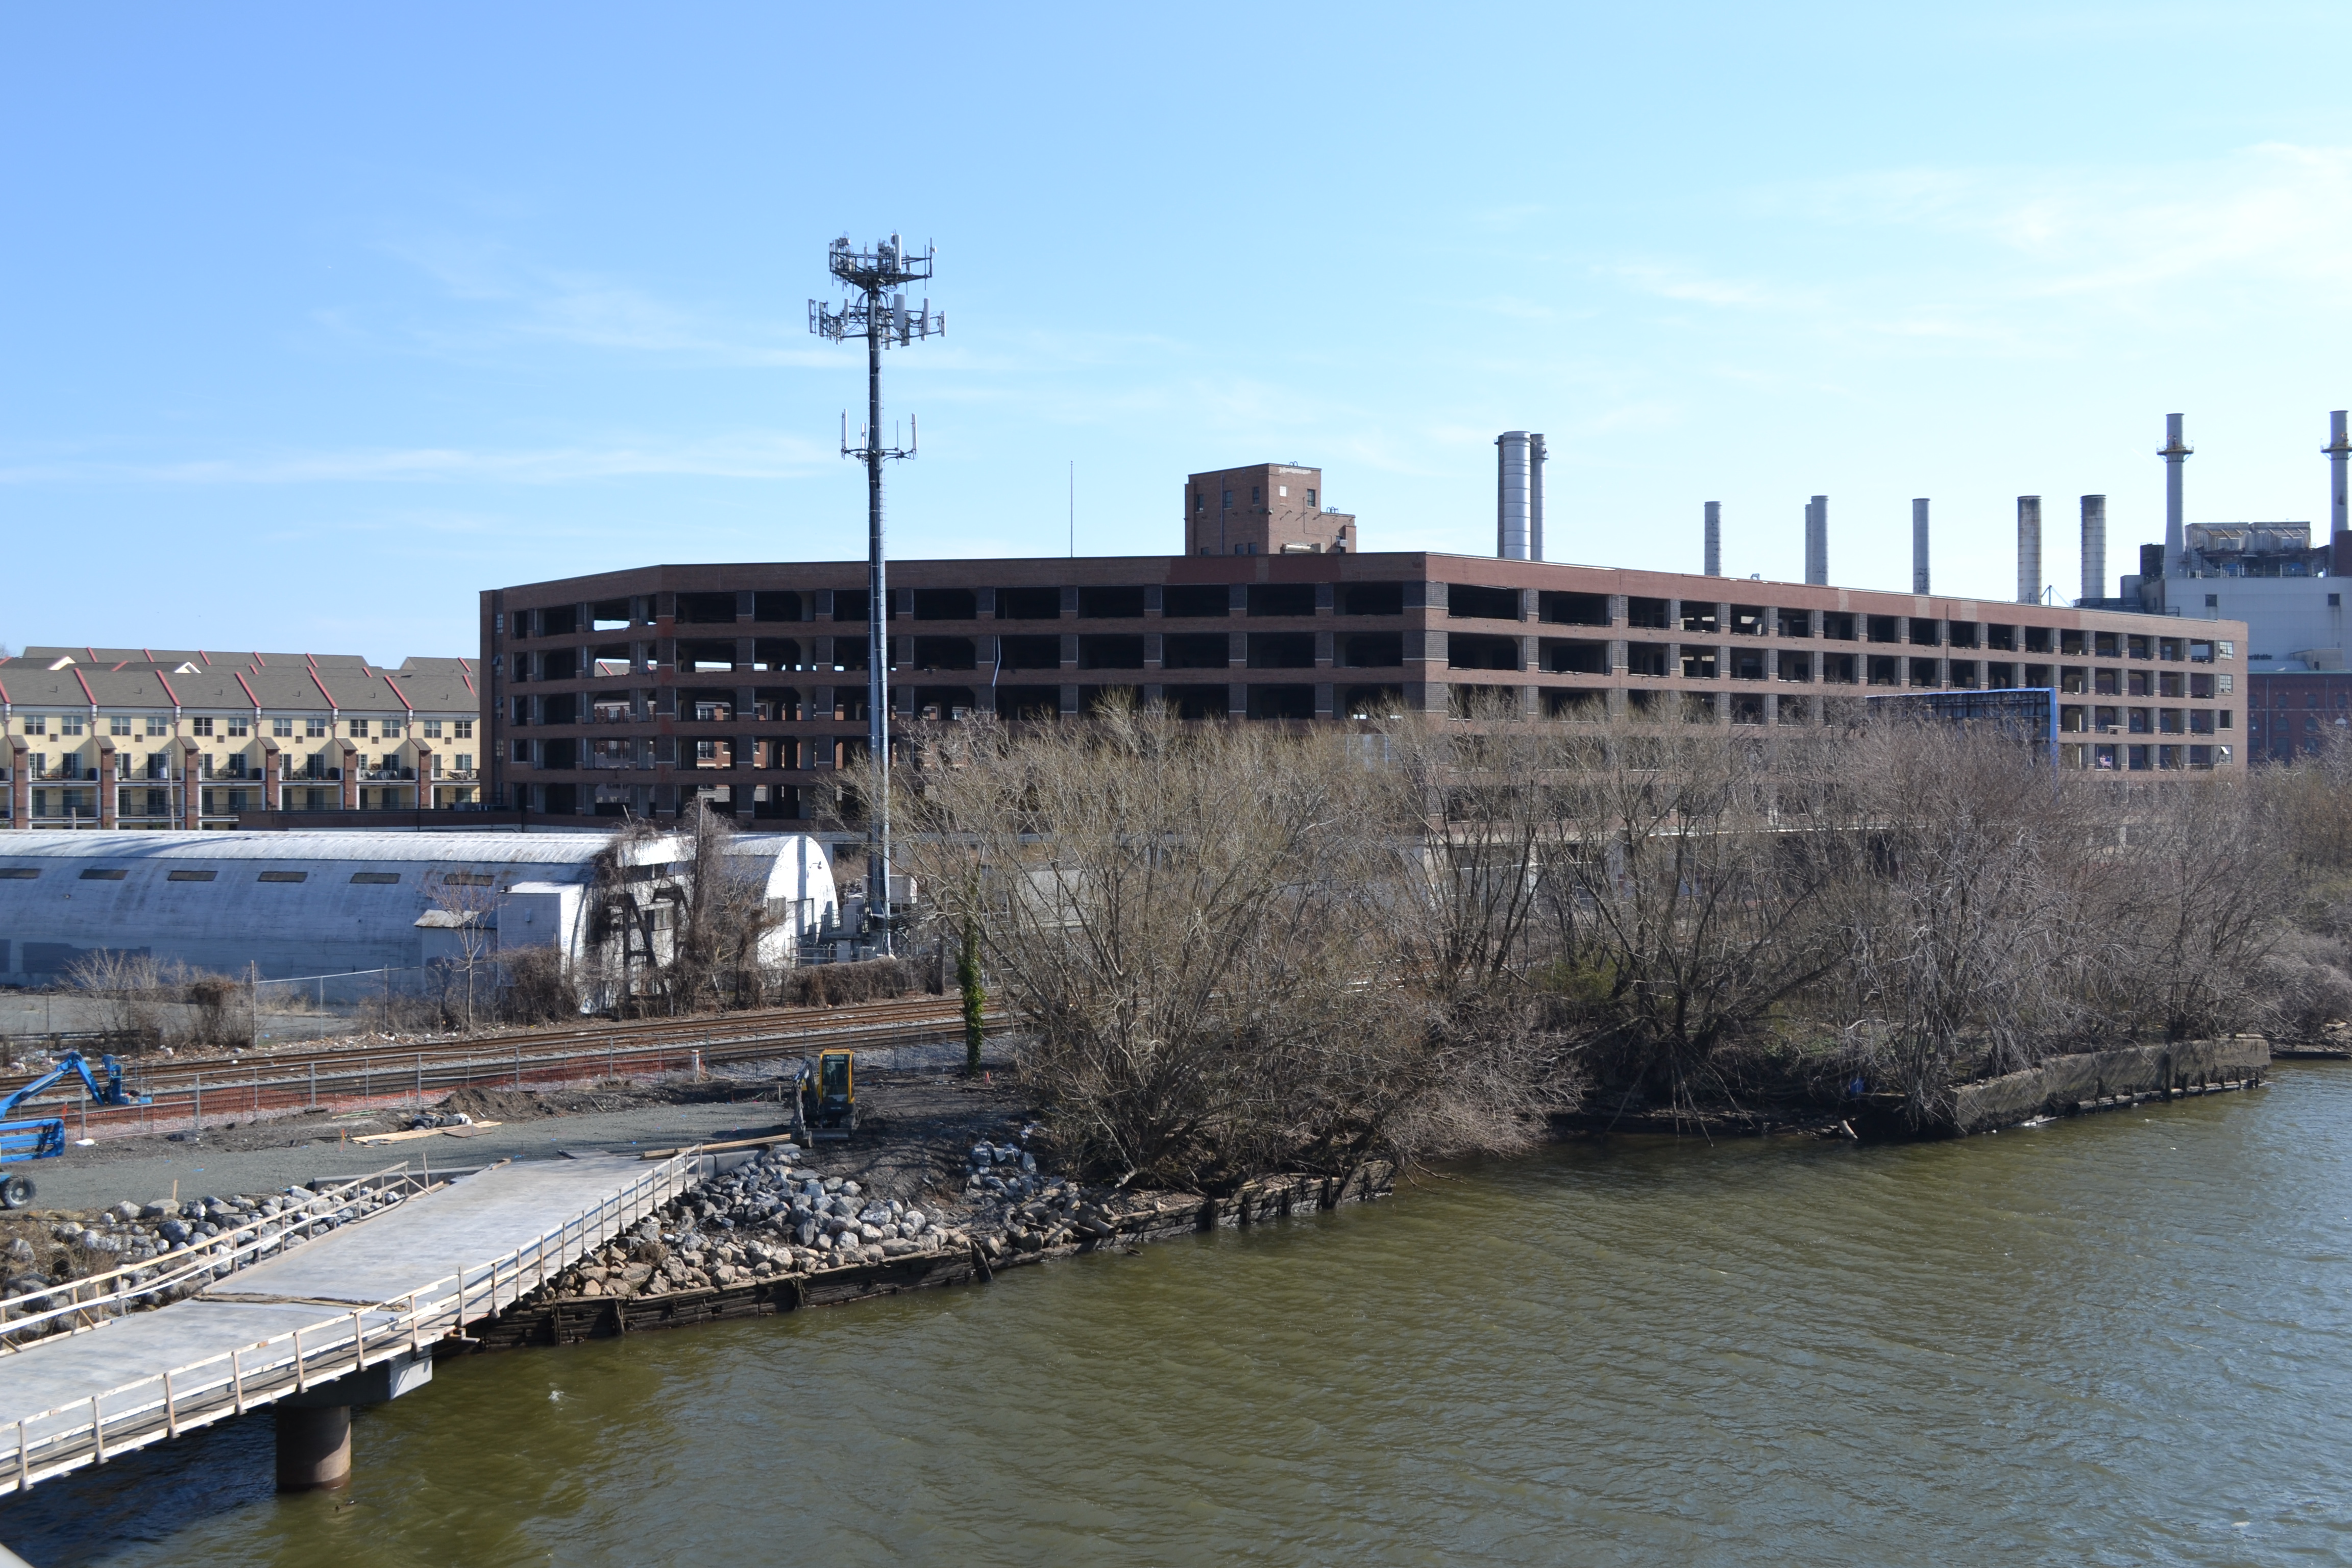 Schuylkill River Development Corporation has plans to extend the Schuylkill River Trail in front of the CHOP property